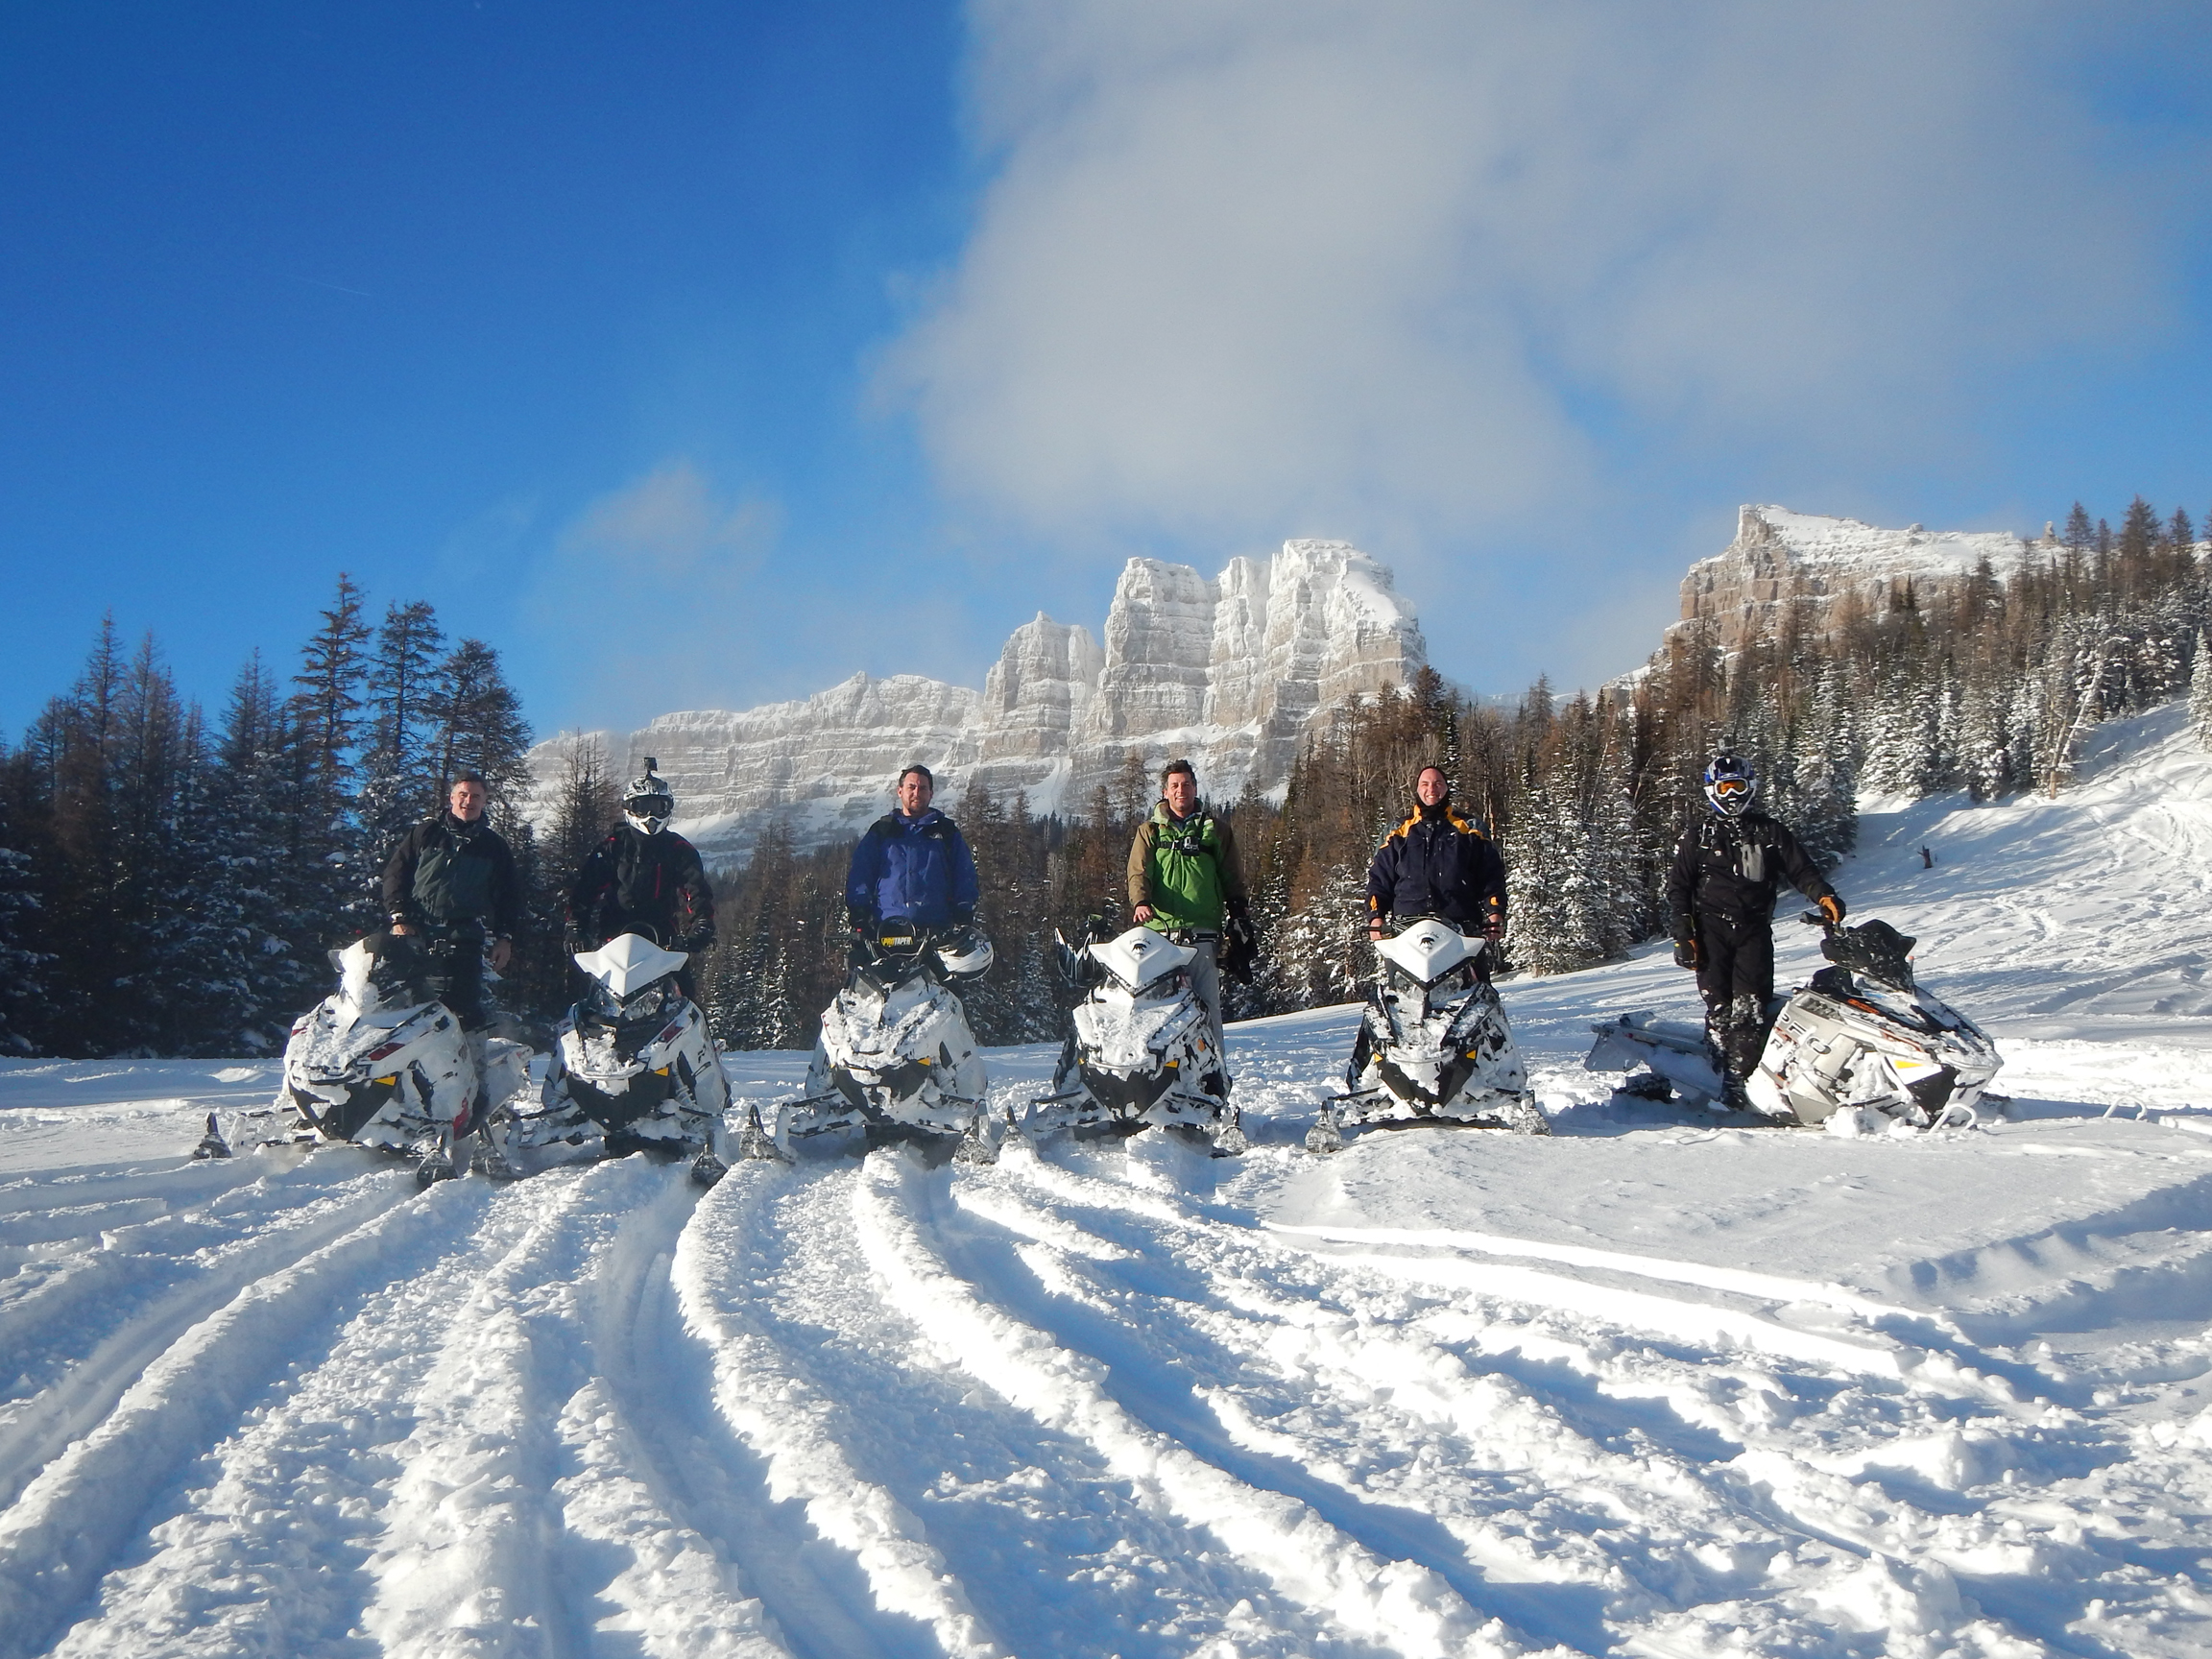 Tucked deep in the Shoshone National Forest near Dubois, Wyoming, Brooks Lake Lodge is a world-renowned snowmobilers’ playground with 2 million acres to explore.